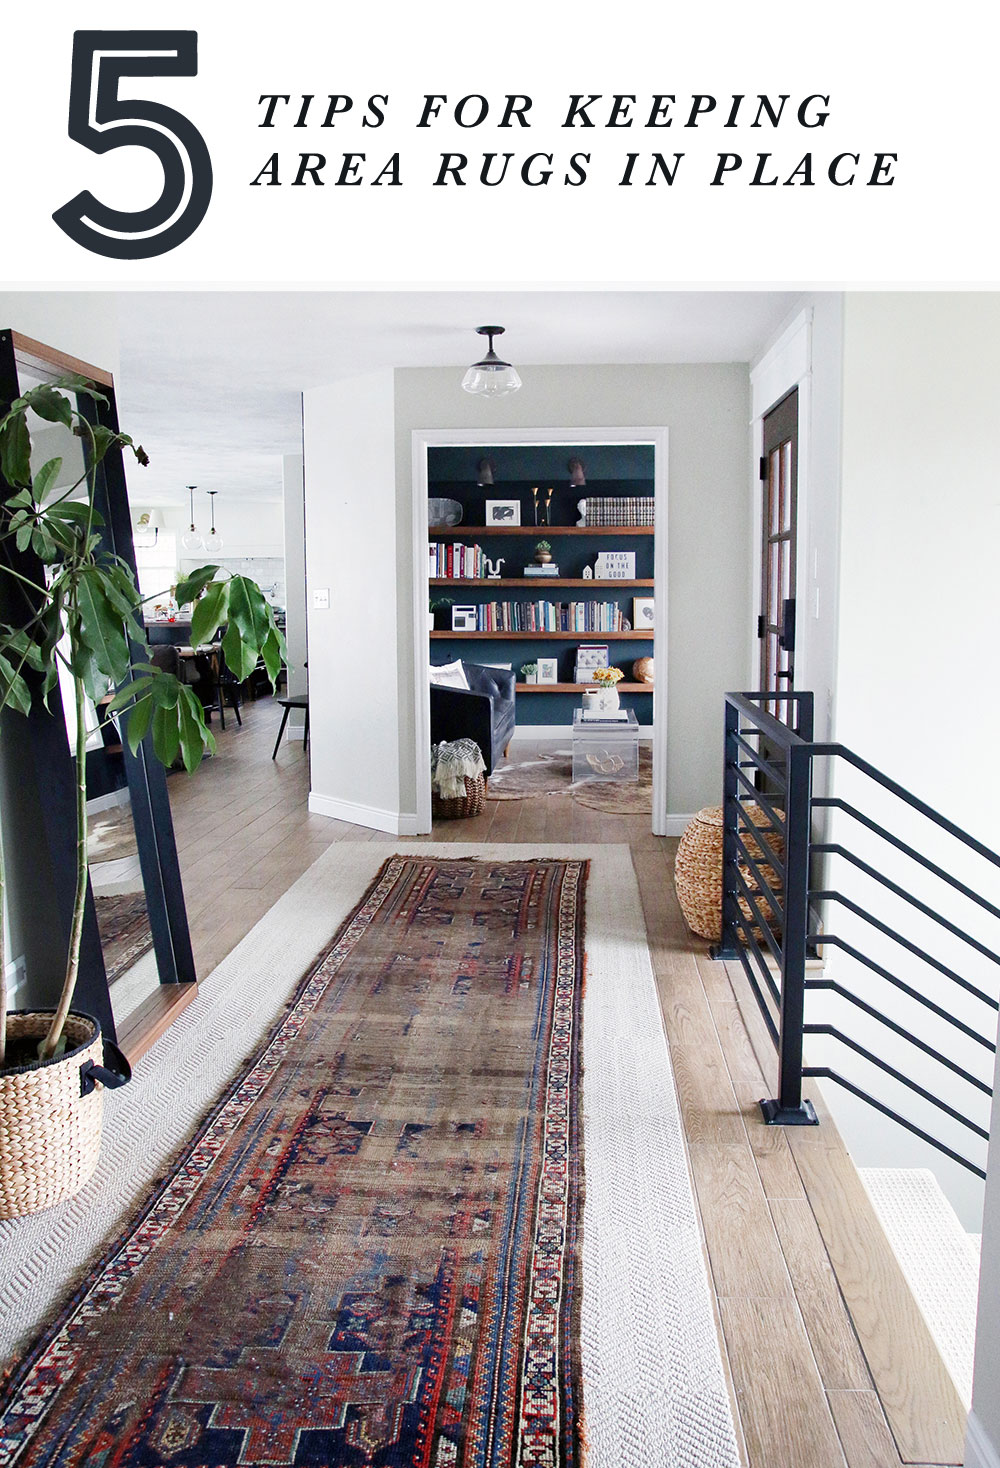 https://www.chrislovesjulia.com/wp-content/uploads/2017/01/5-tips-for-keeping-area-rugs-in-place.jpg